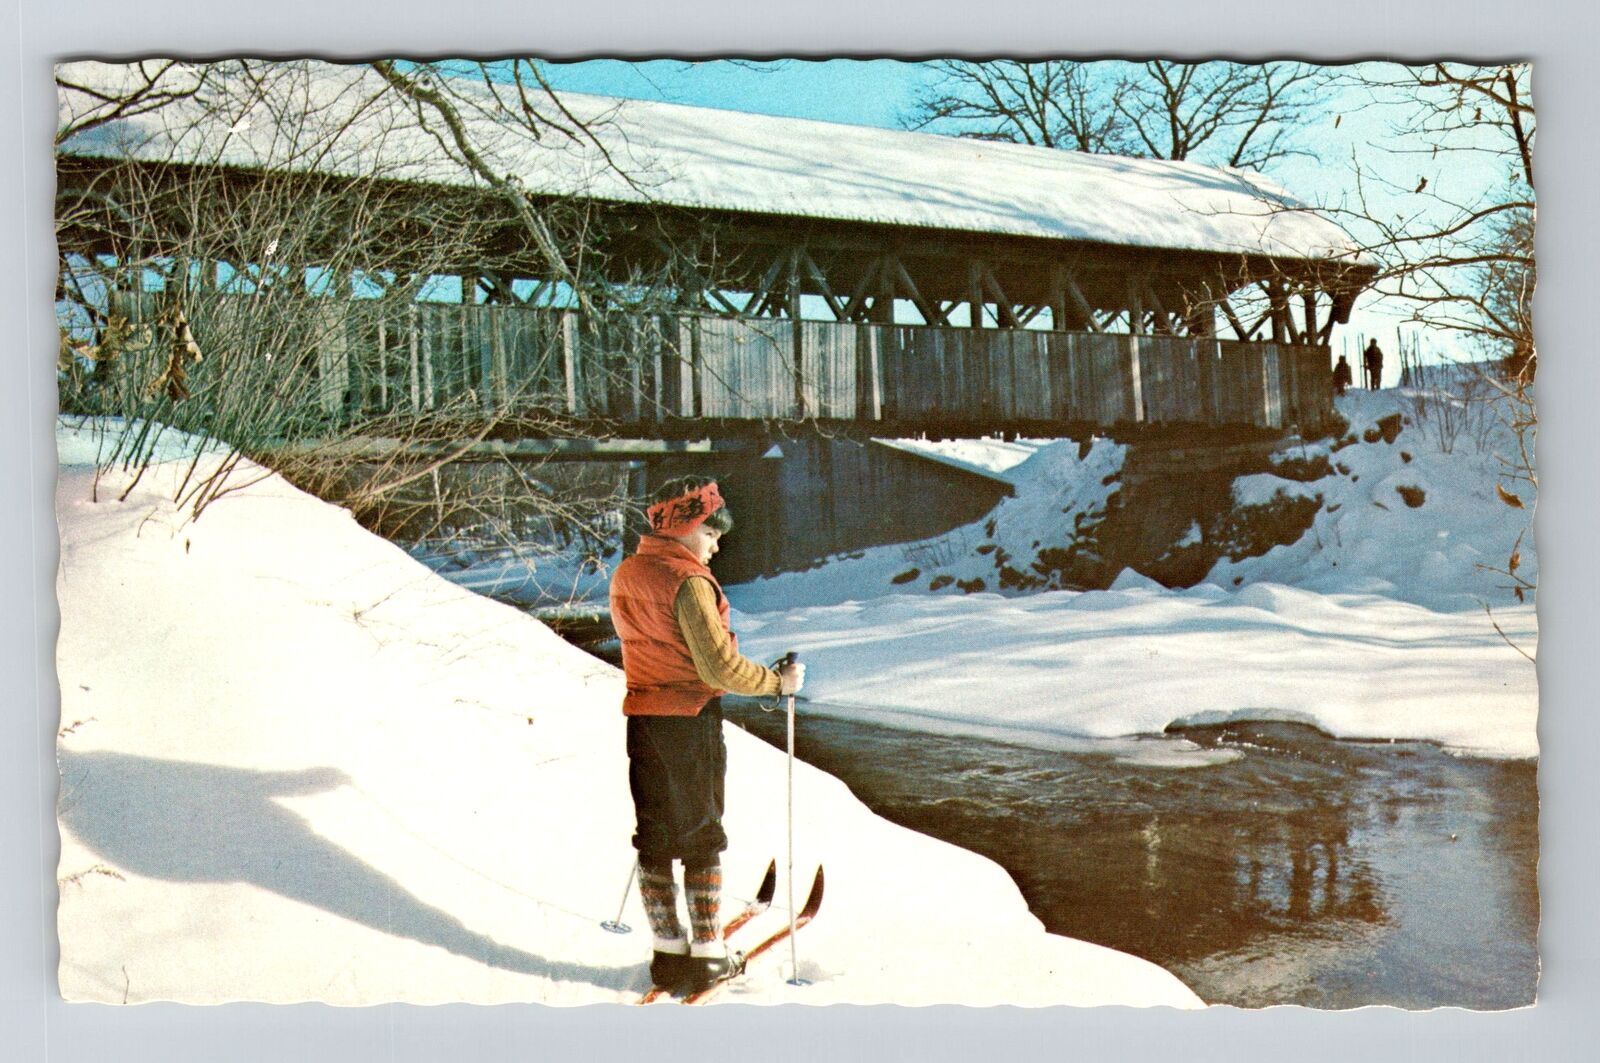 Newry ME-Maine, Sunday River, Child skiing by River, Vintage Postcard